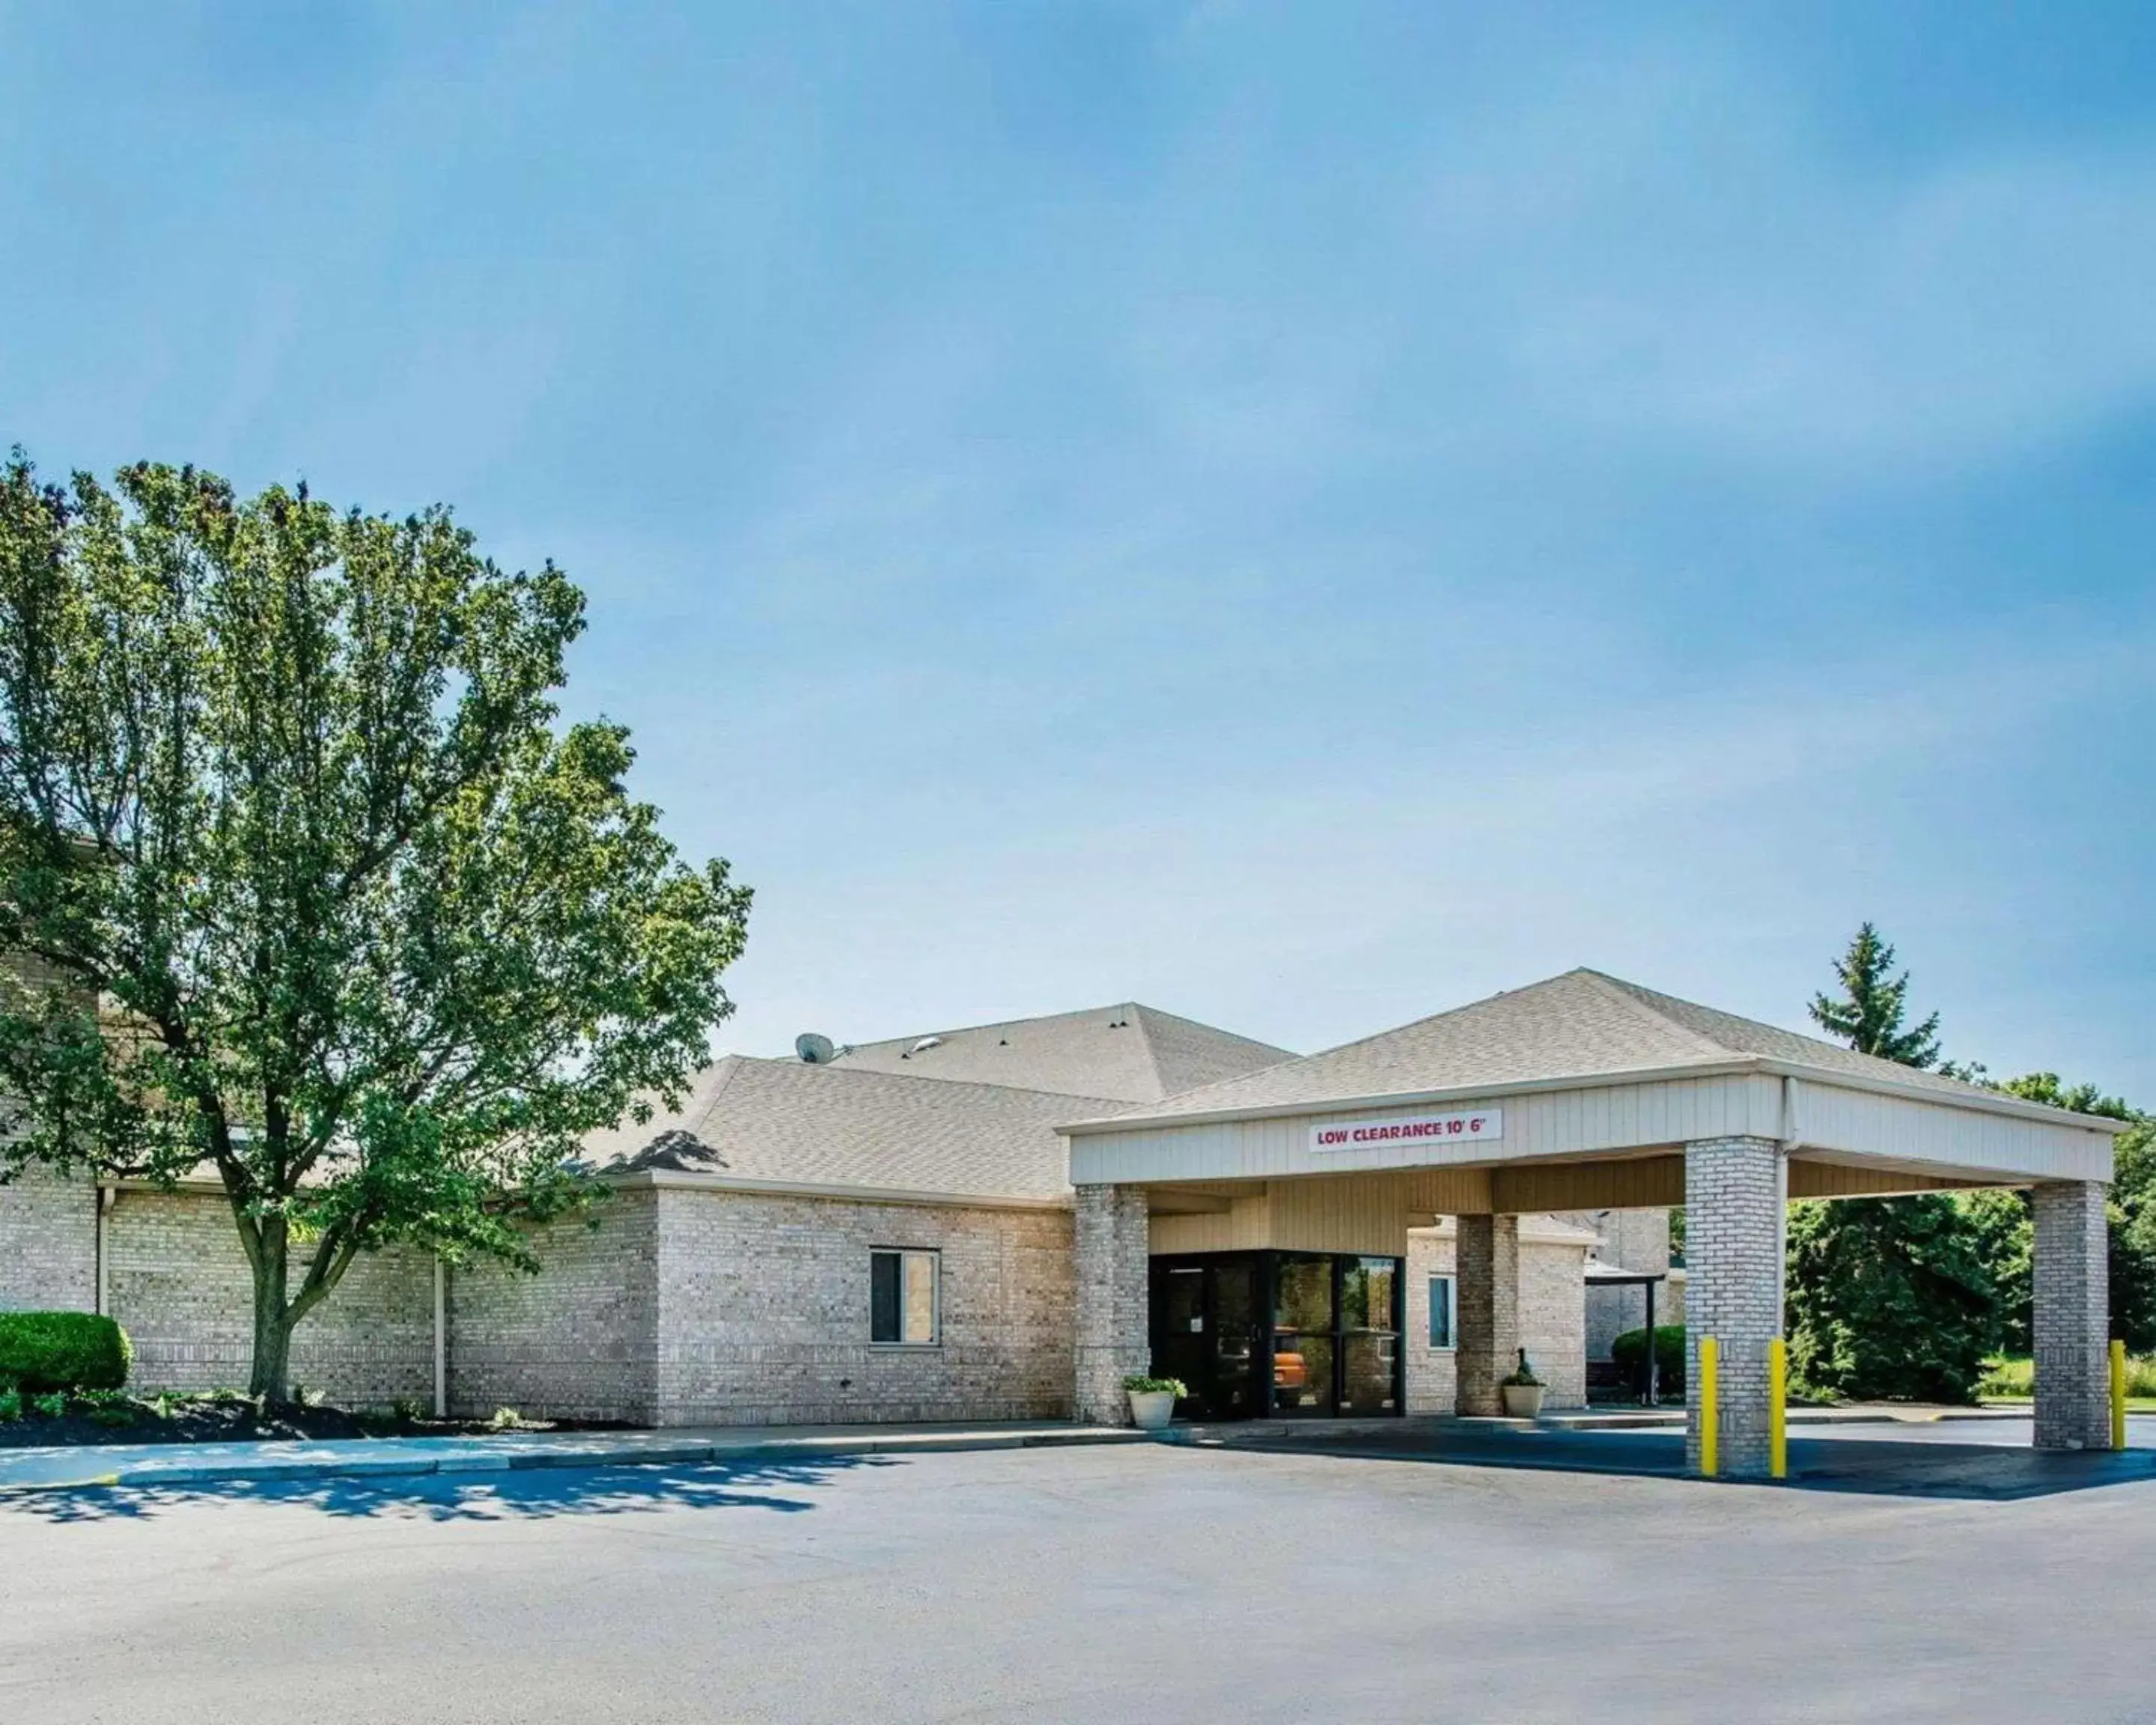 Property Building in Comfort Inn Bellefontaine